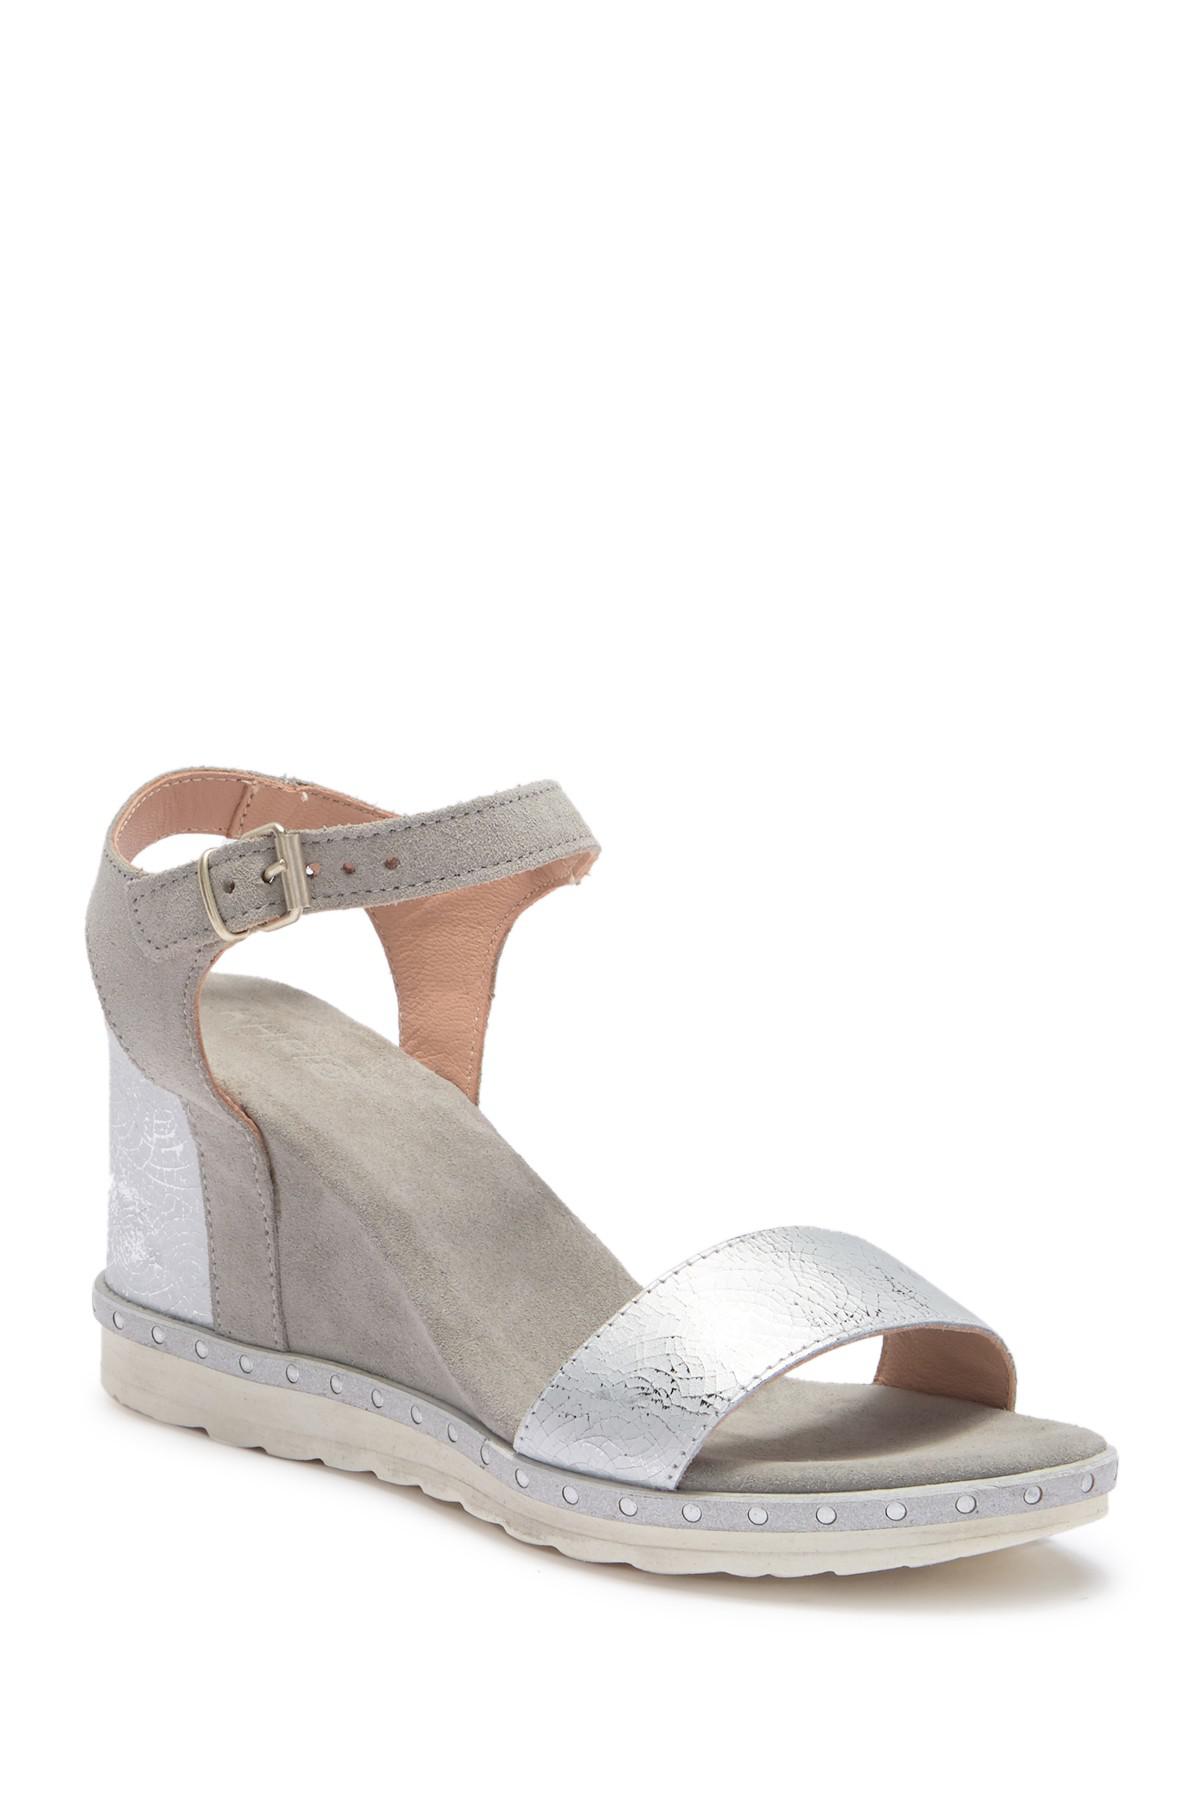 Khrio Leather Contrast Wedge Sandal - Lyst